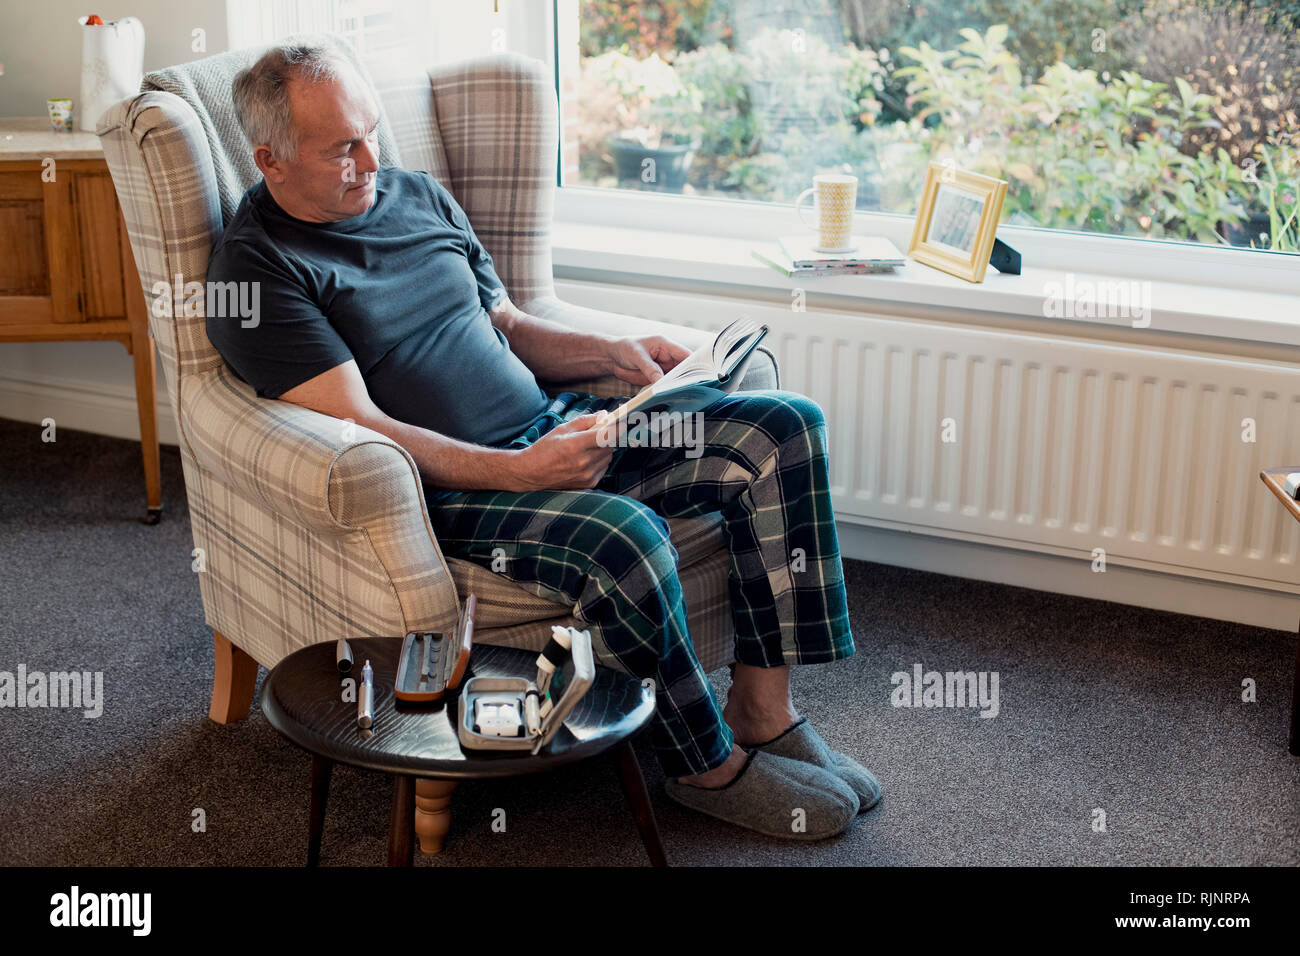 Senior diabetic man is relaxing in the living room of his home with a book. His blood glucose testing kit is on the table next to him. Stock Photo